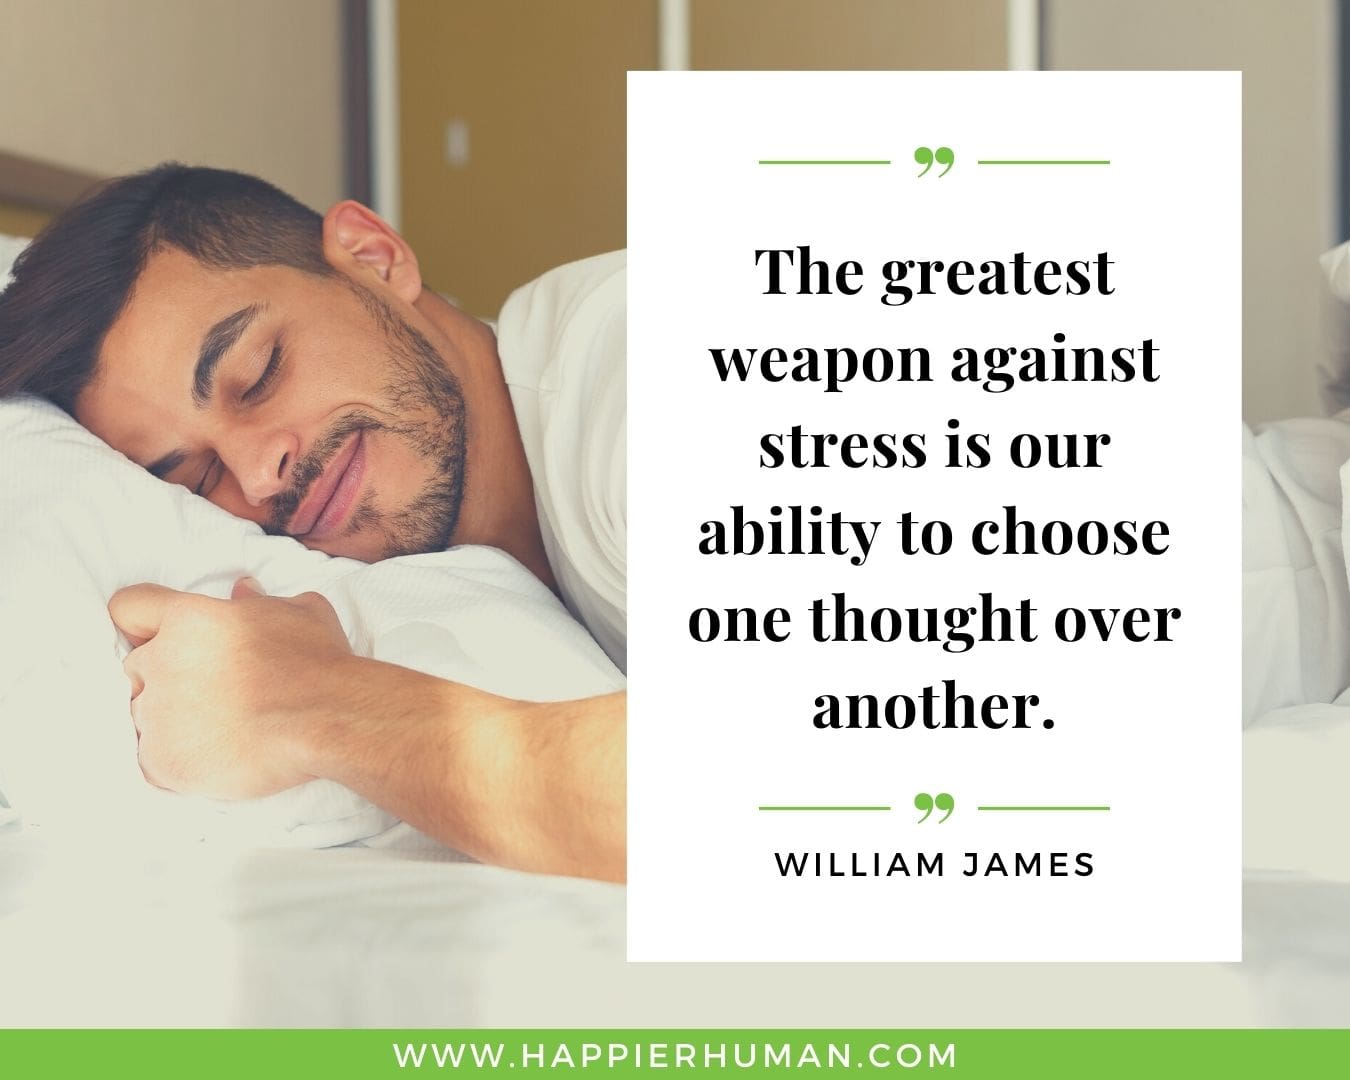 Overthinking Quotes - “The greatest weapon against stress is our ability to choose one thought over another.” - William James